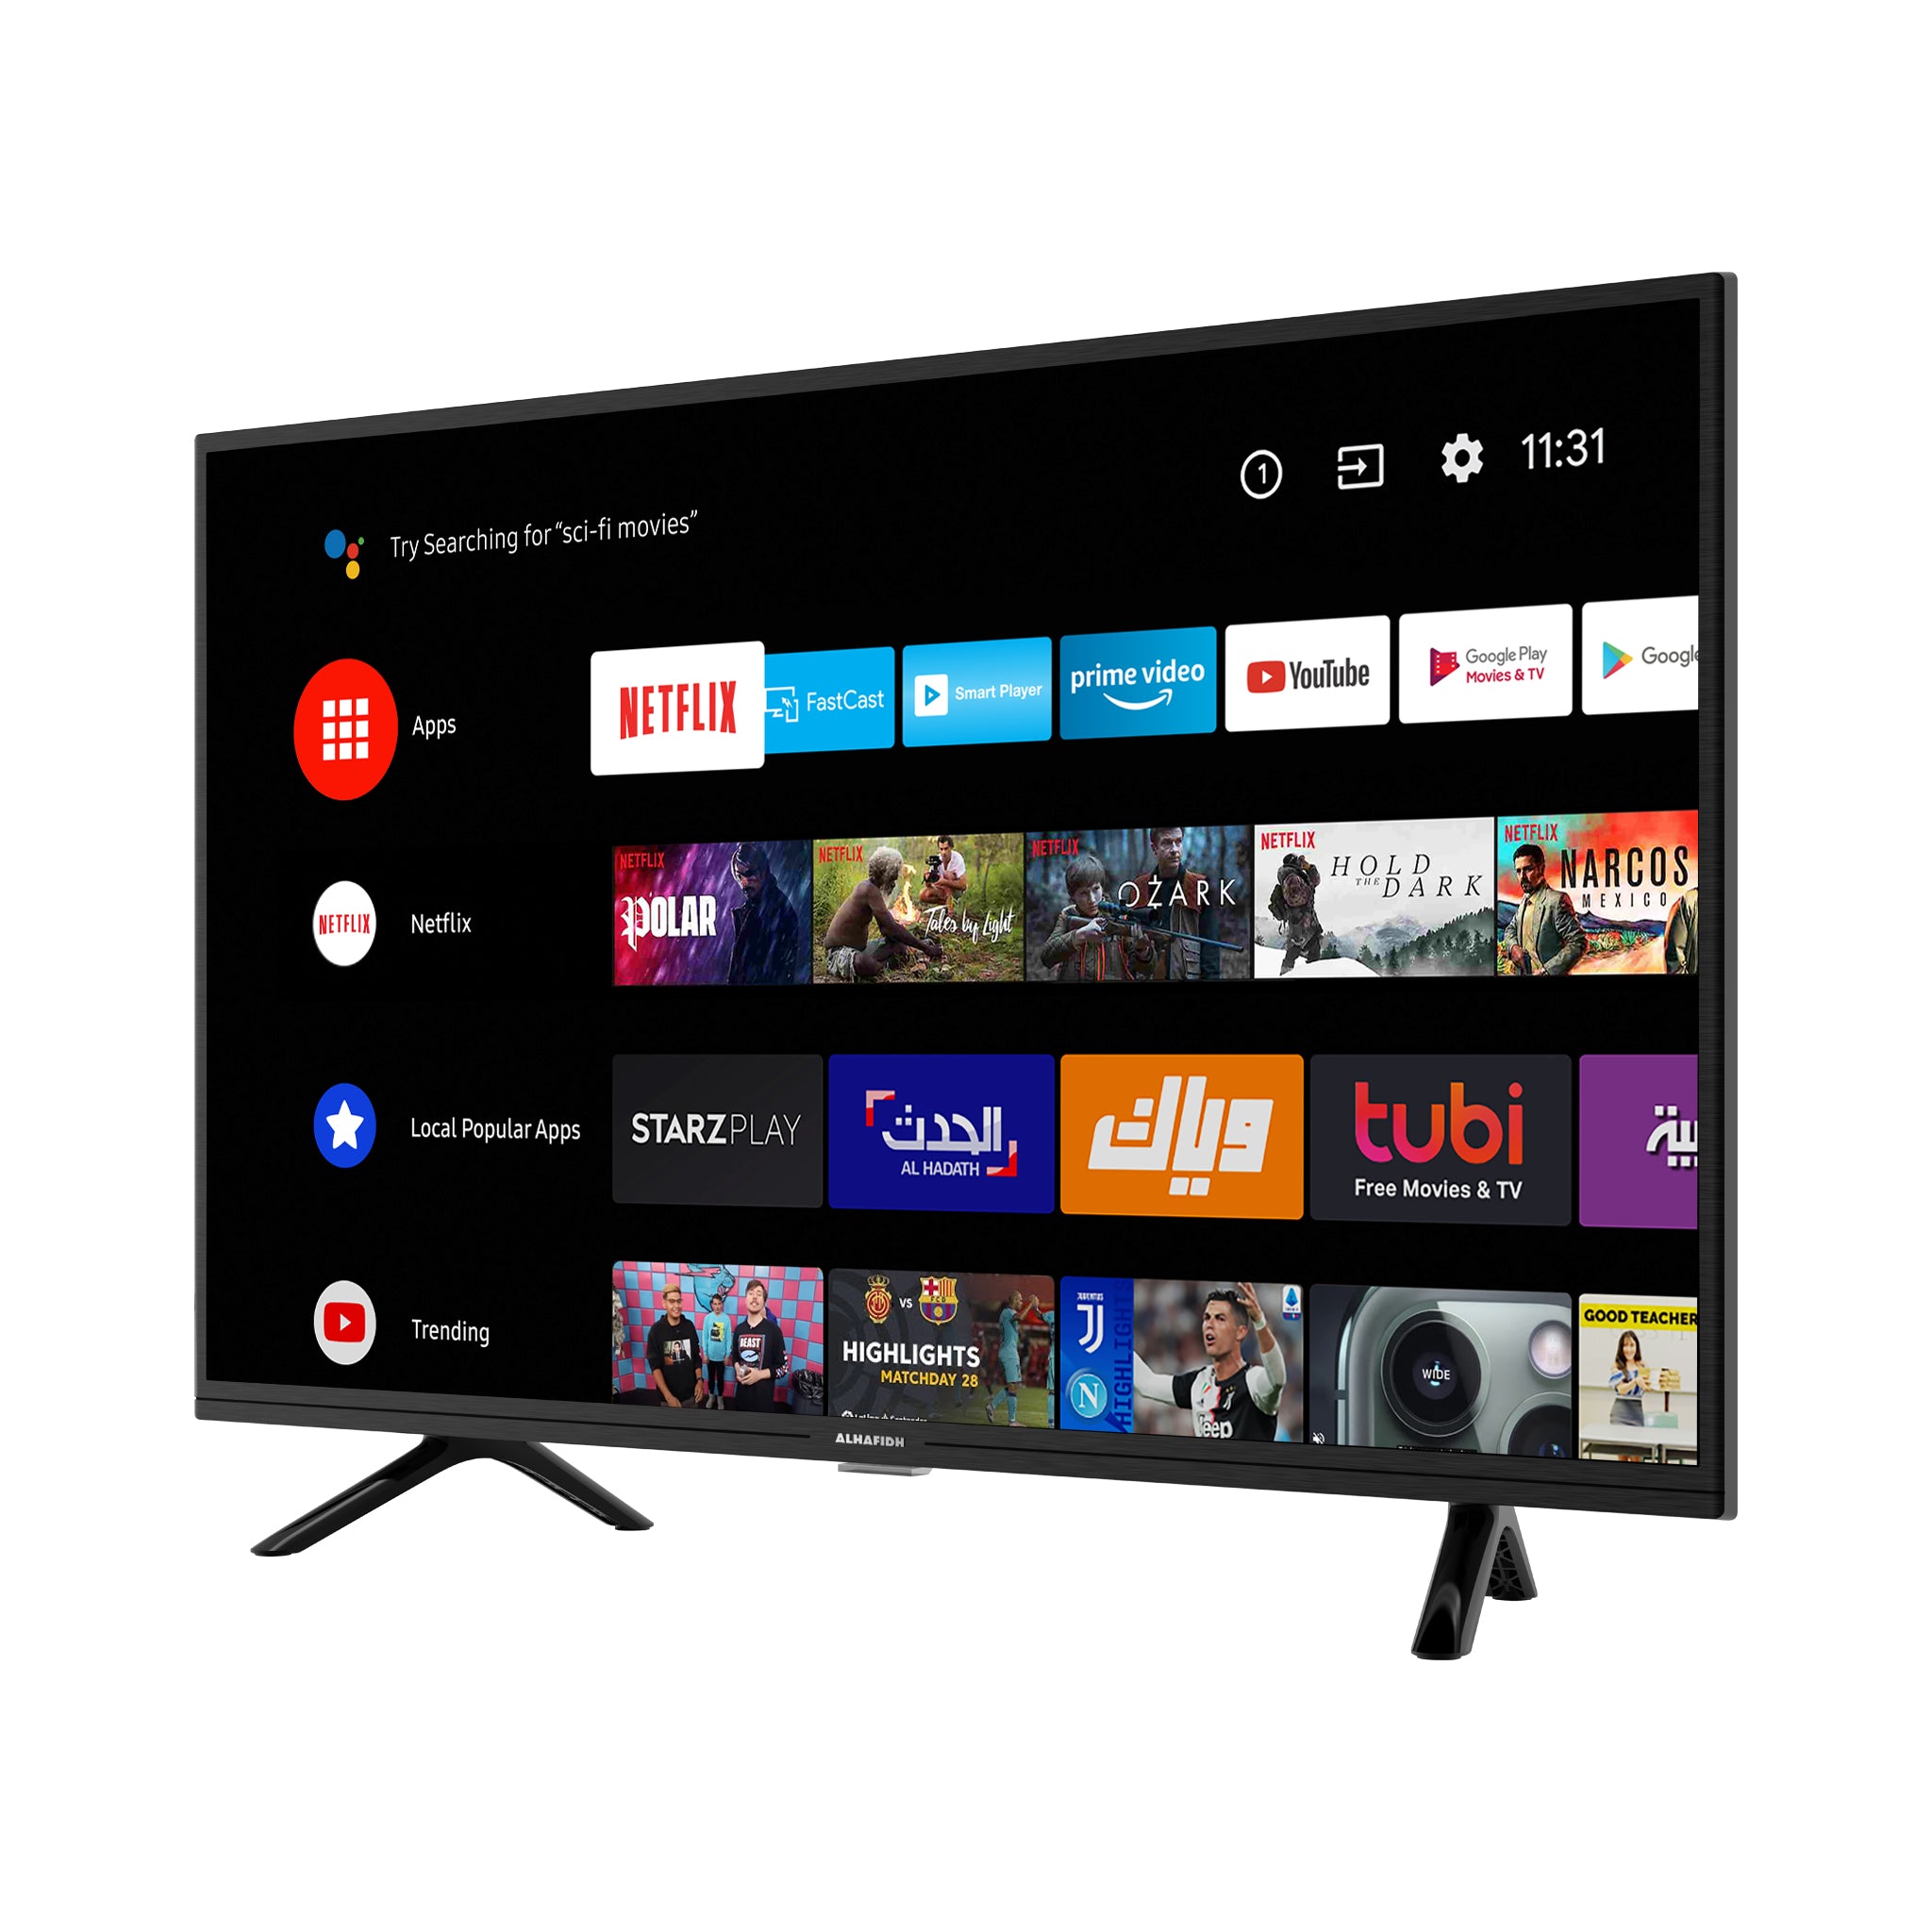 32-inch LED HD Smart Android TV